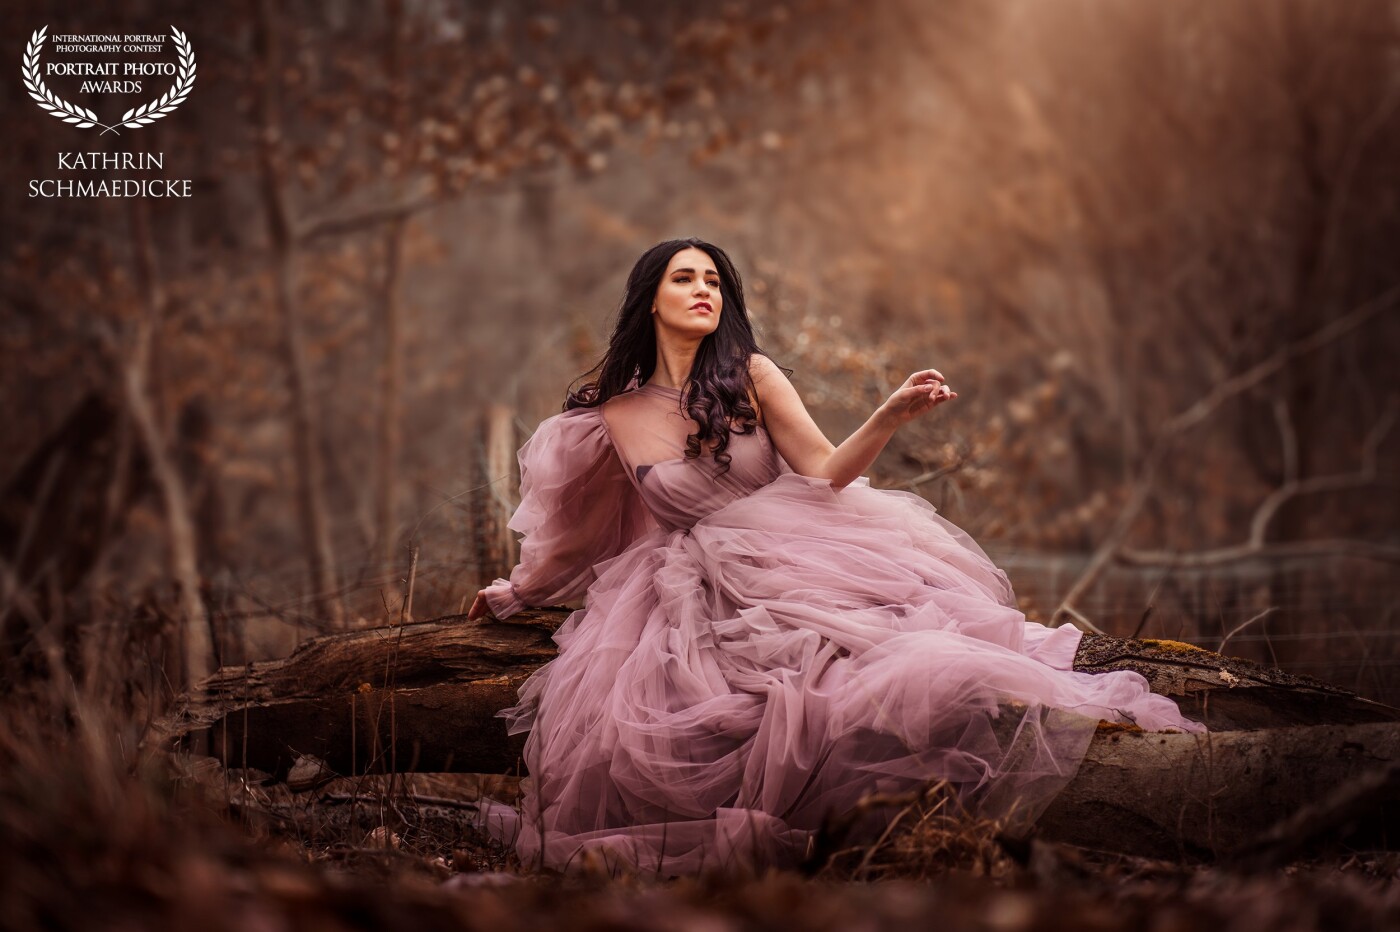 the beauty of nature in harmony with an enchantment of man...a beautiful woman in a breathtakingly beautiful dress.